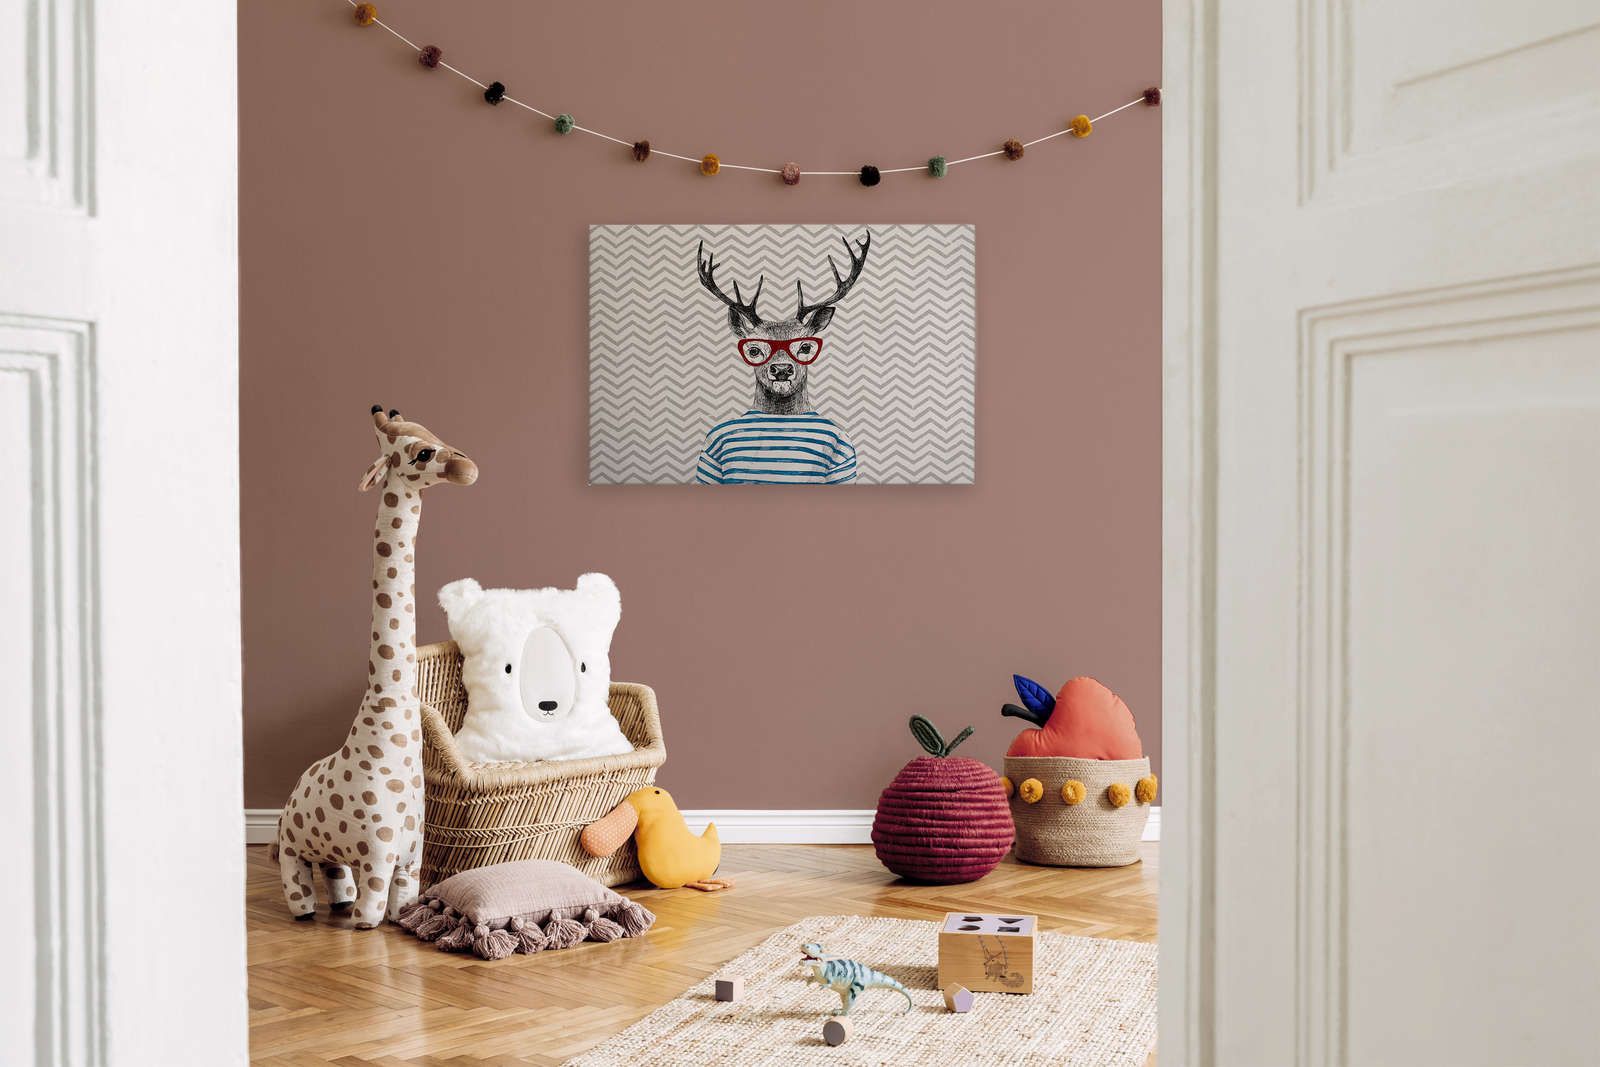             Nursery canvas picture comic design, deer with glasses - 0.90 m x 0.60 m
        